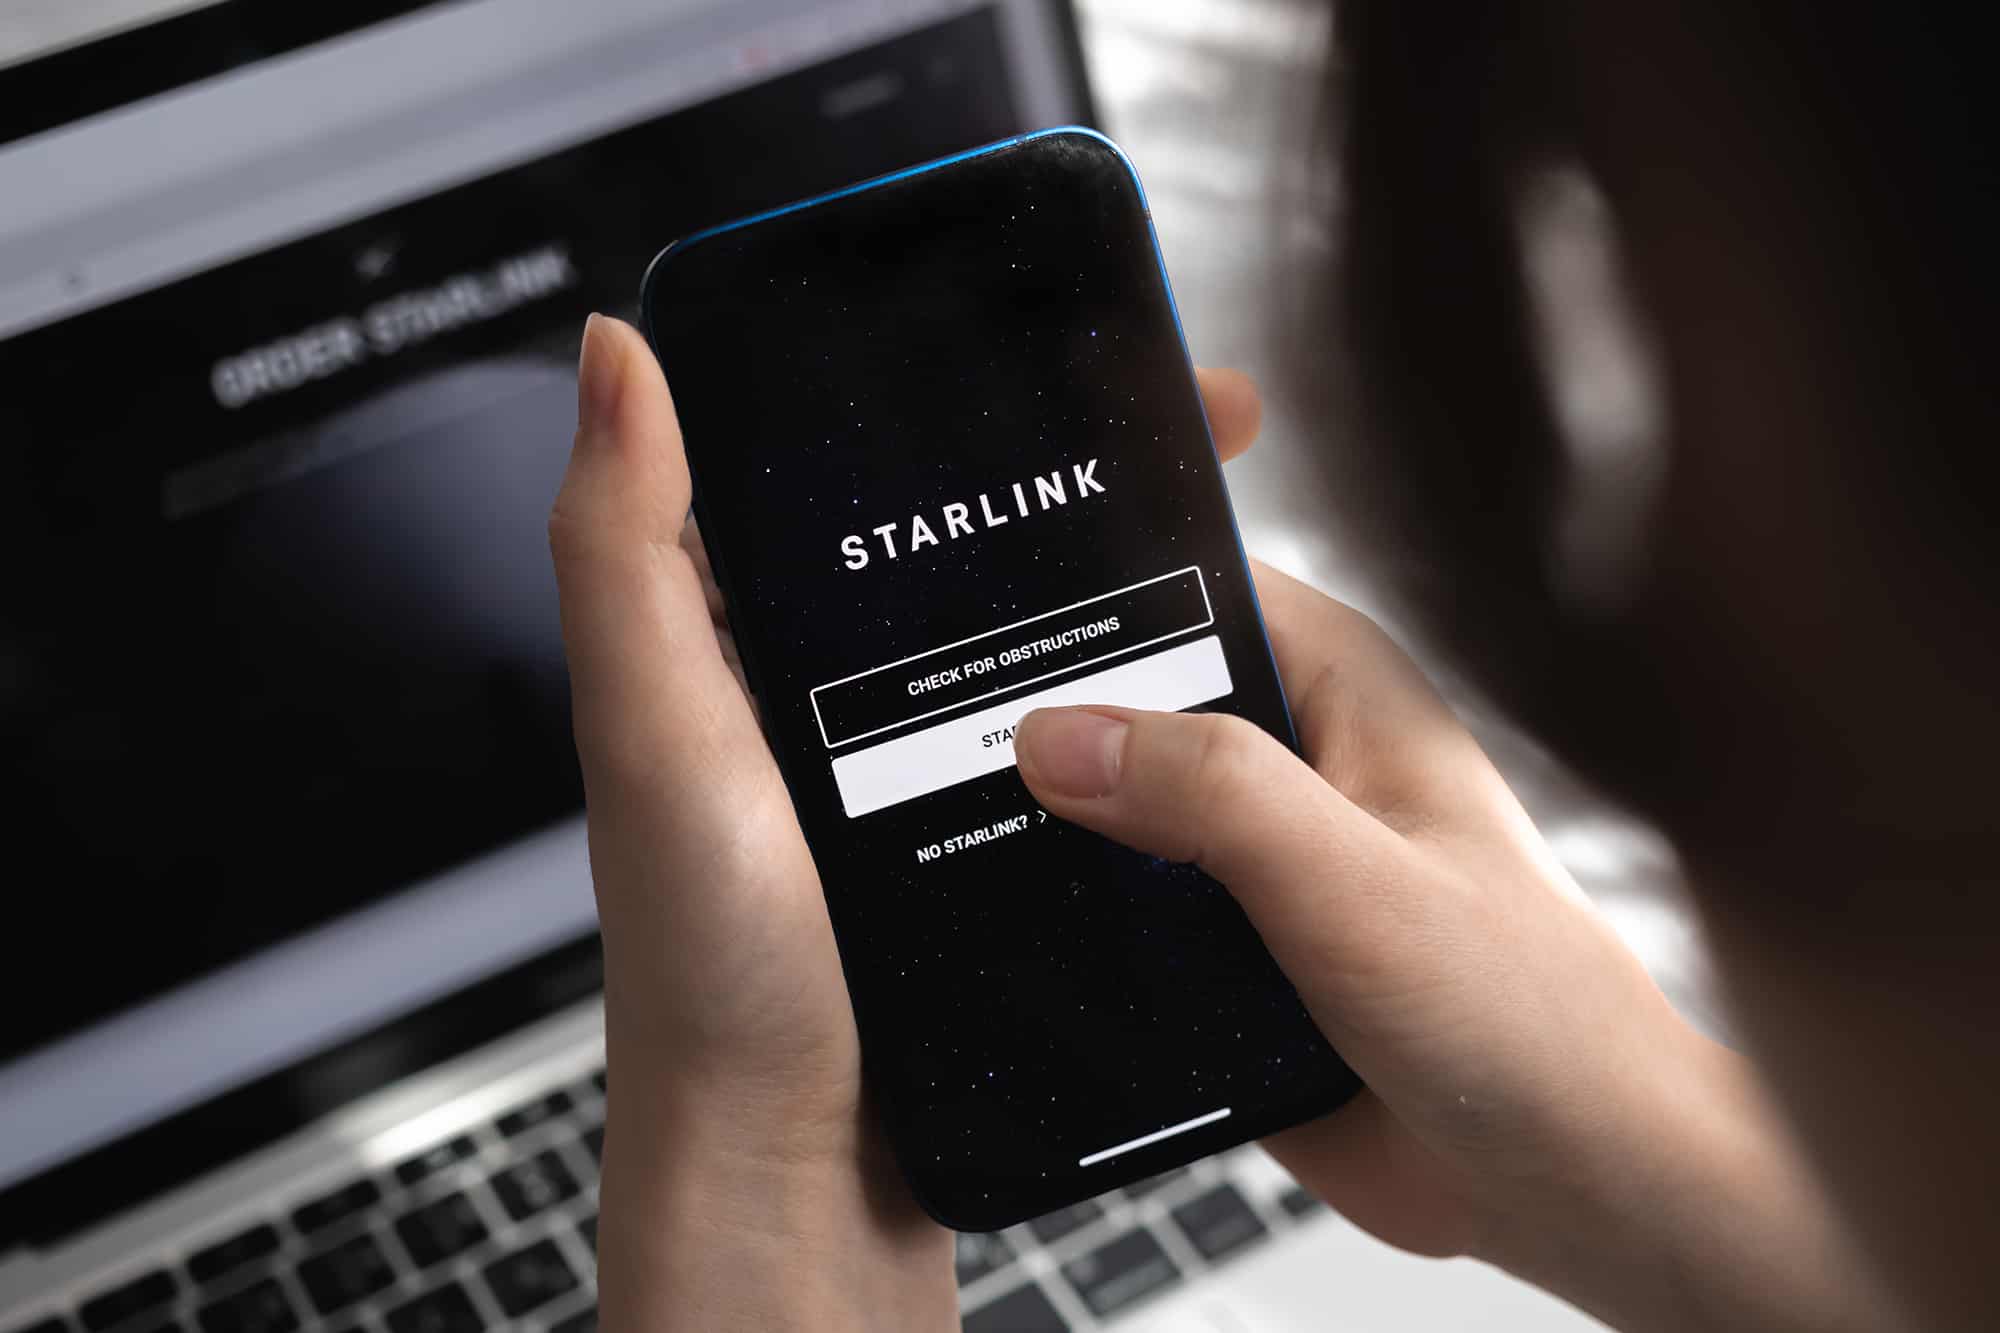 Woman using the Starlink app on her phone in front of a laptop